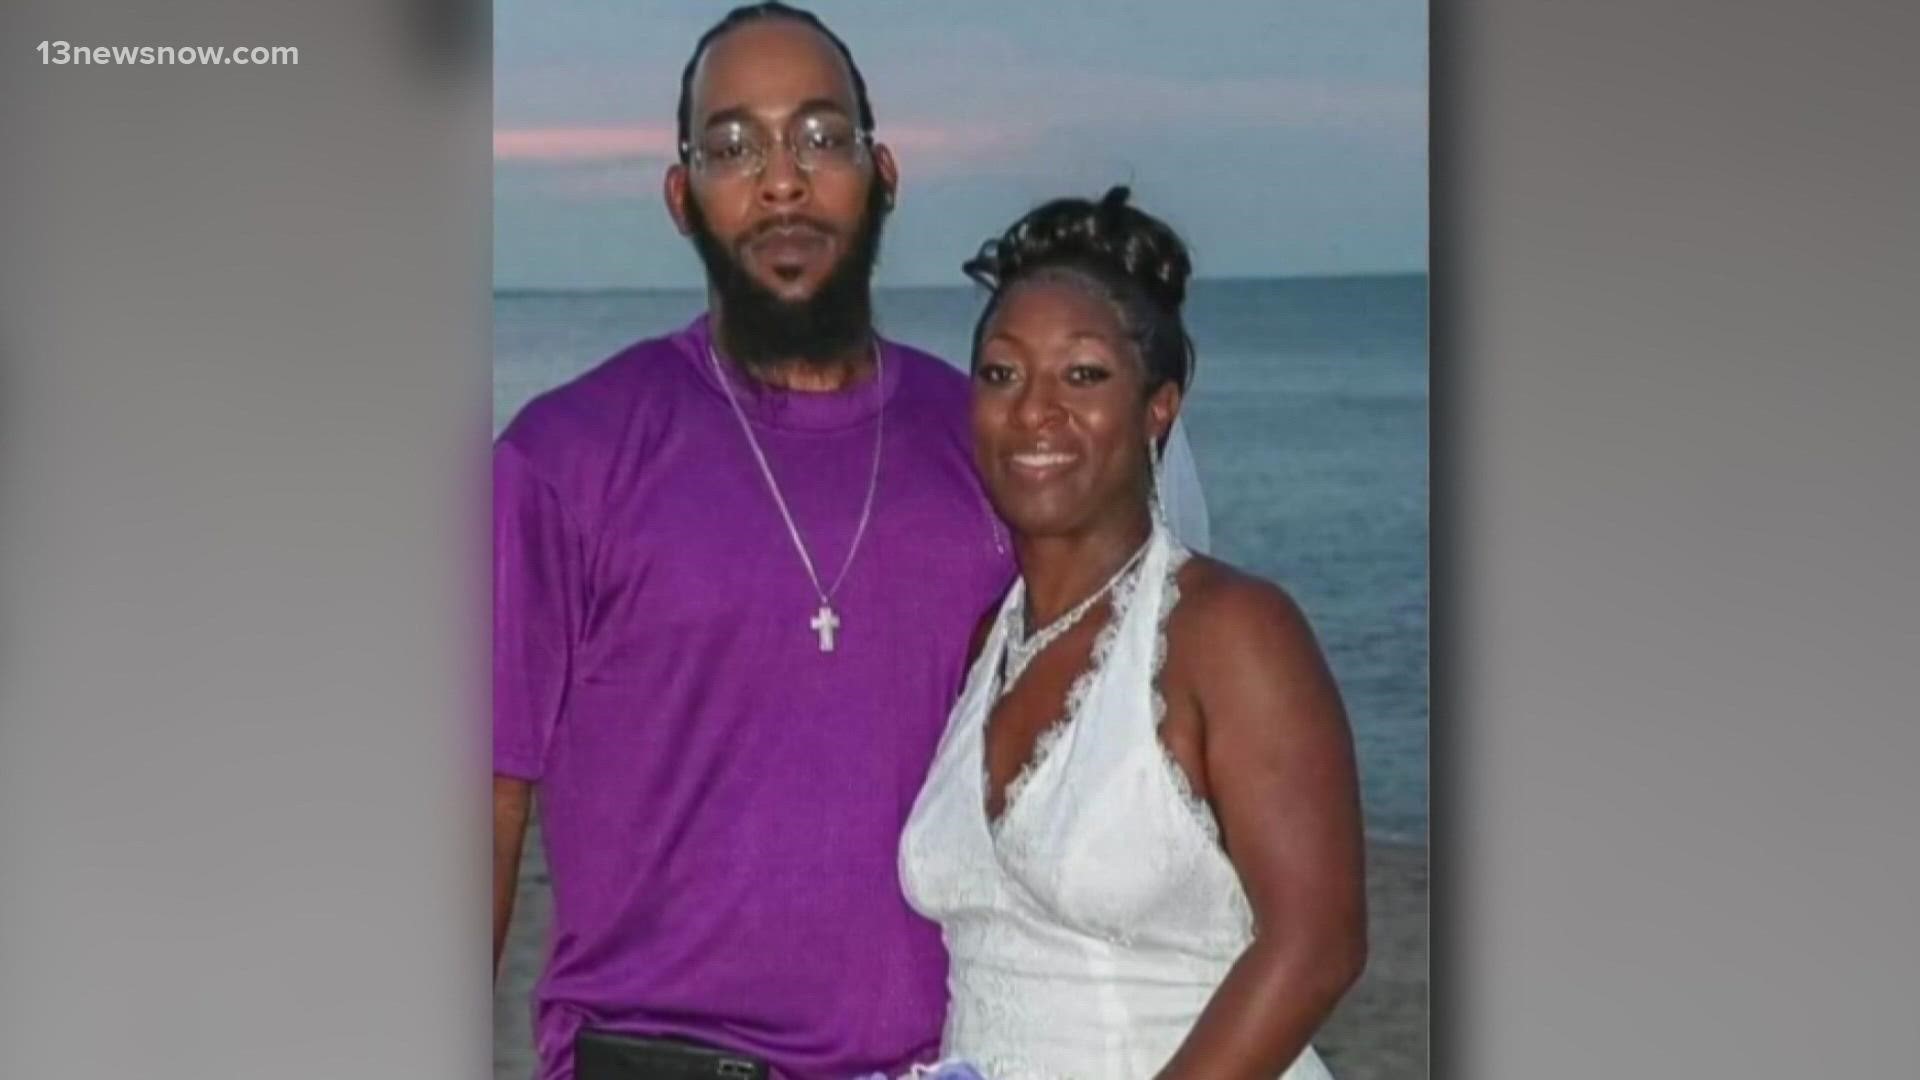 The City of Portsmouth is giving $11 million to a woman who lost her husband, and sustained brain injuries, in a car crash that happened during a police pursuit.